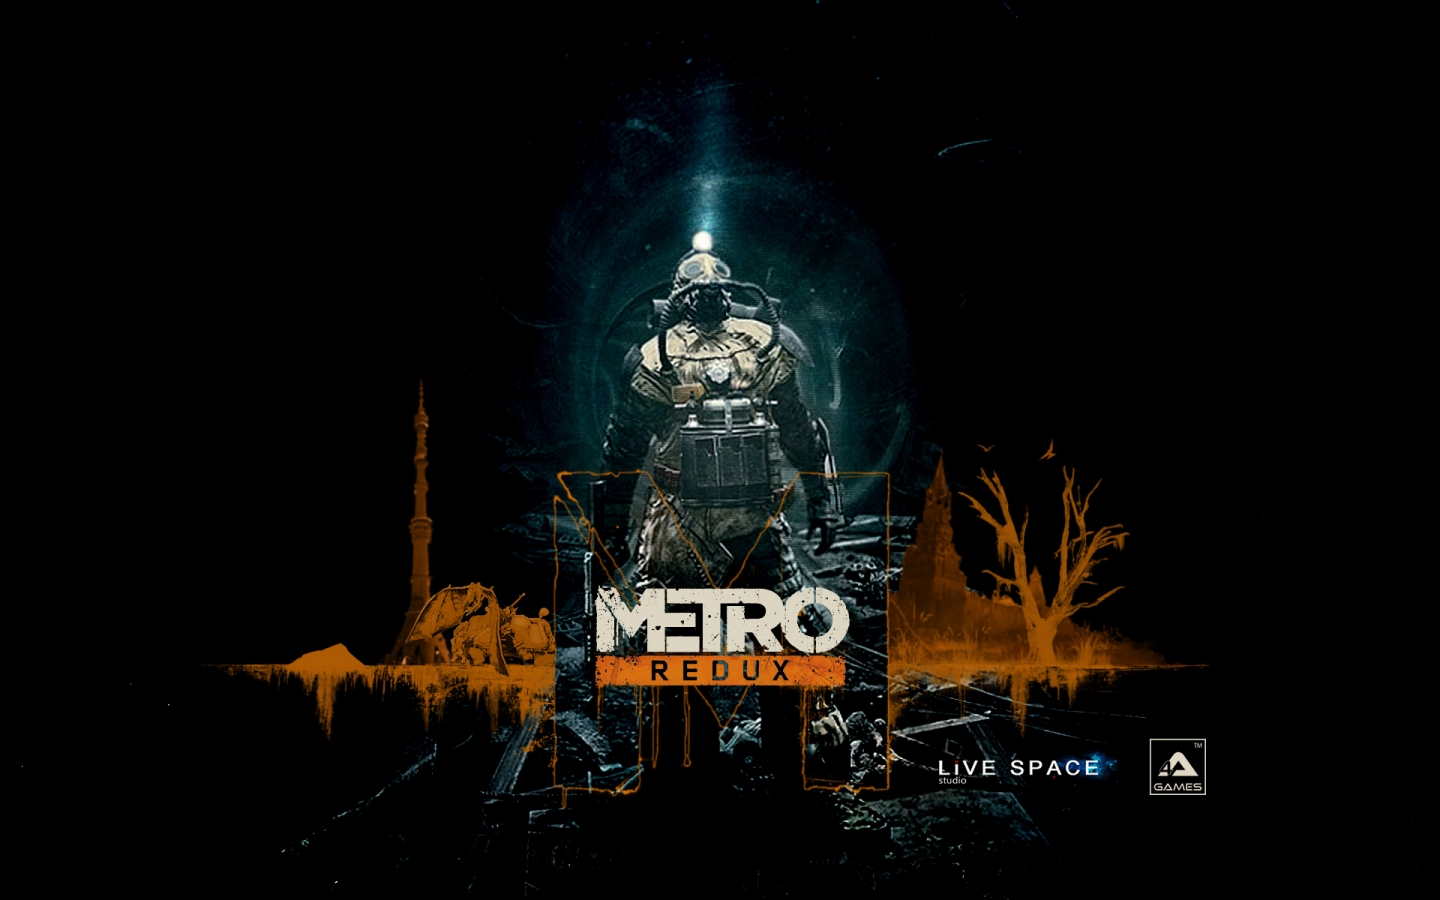 Metro Redux for 1440 x 900 widescreen resolution